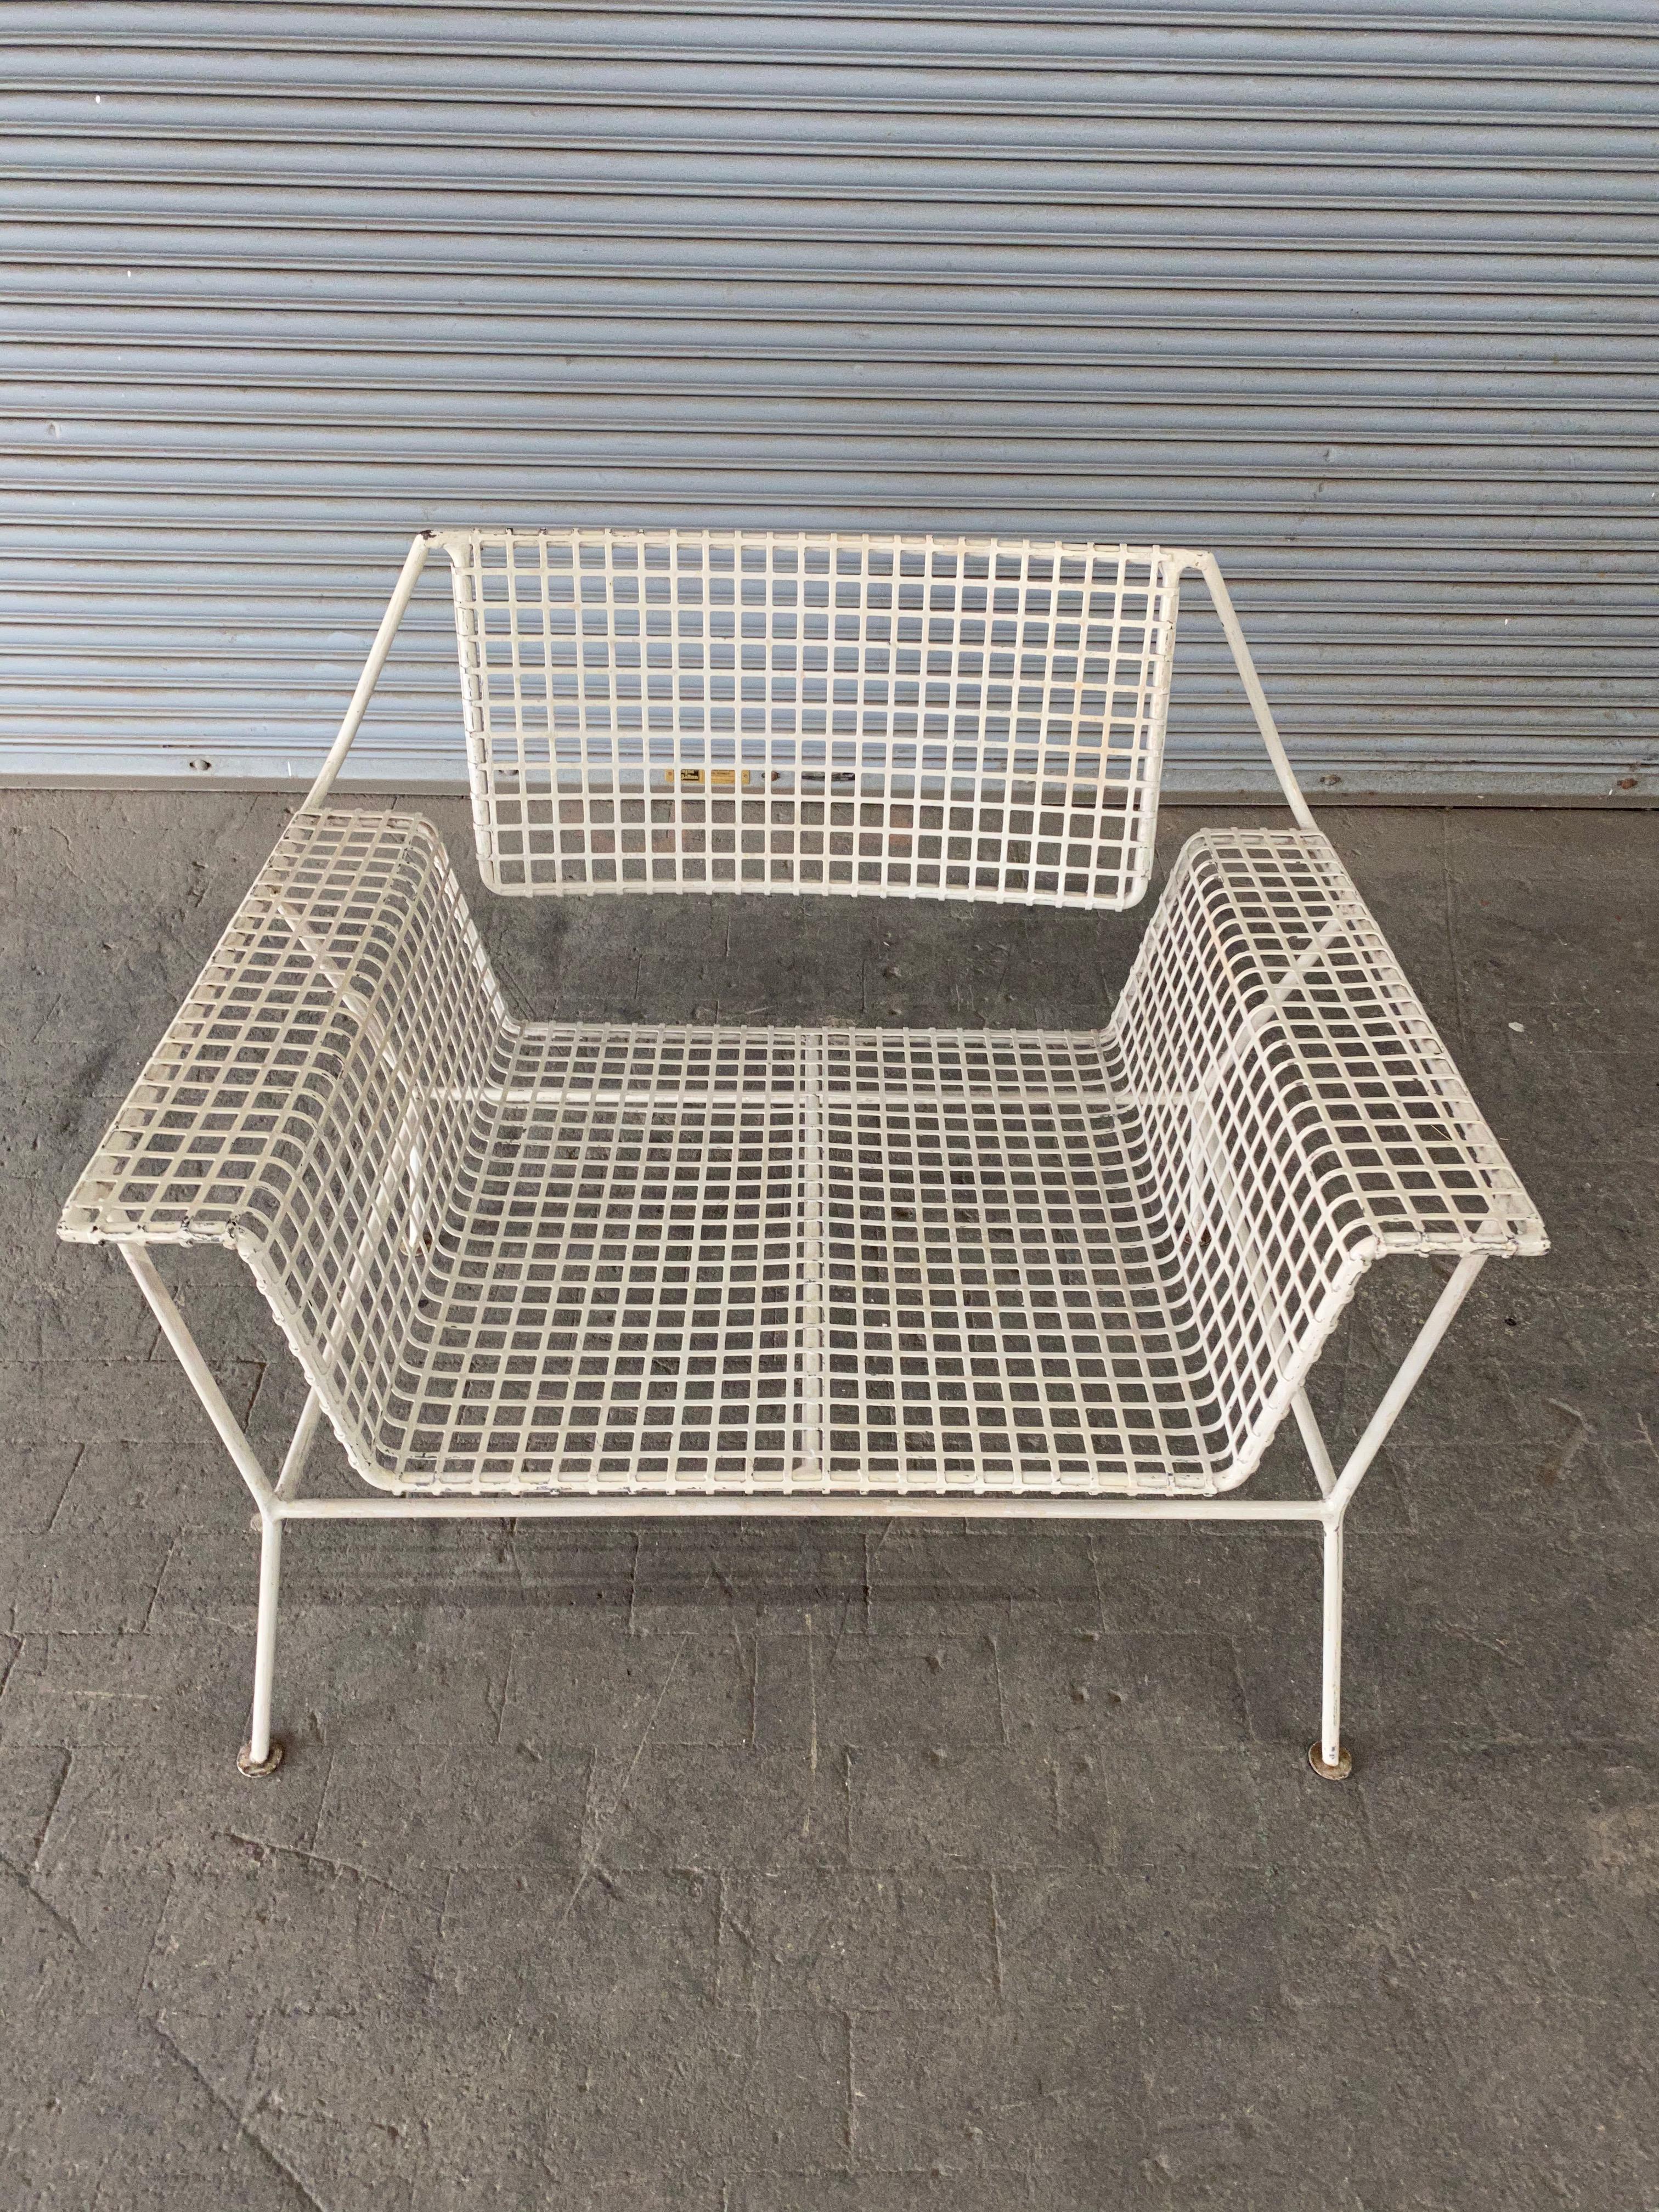 American Mid-Century Modern white iron garden armchair. Part of a larger set that includes an armchair, a three piece settee, and an end table. 


